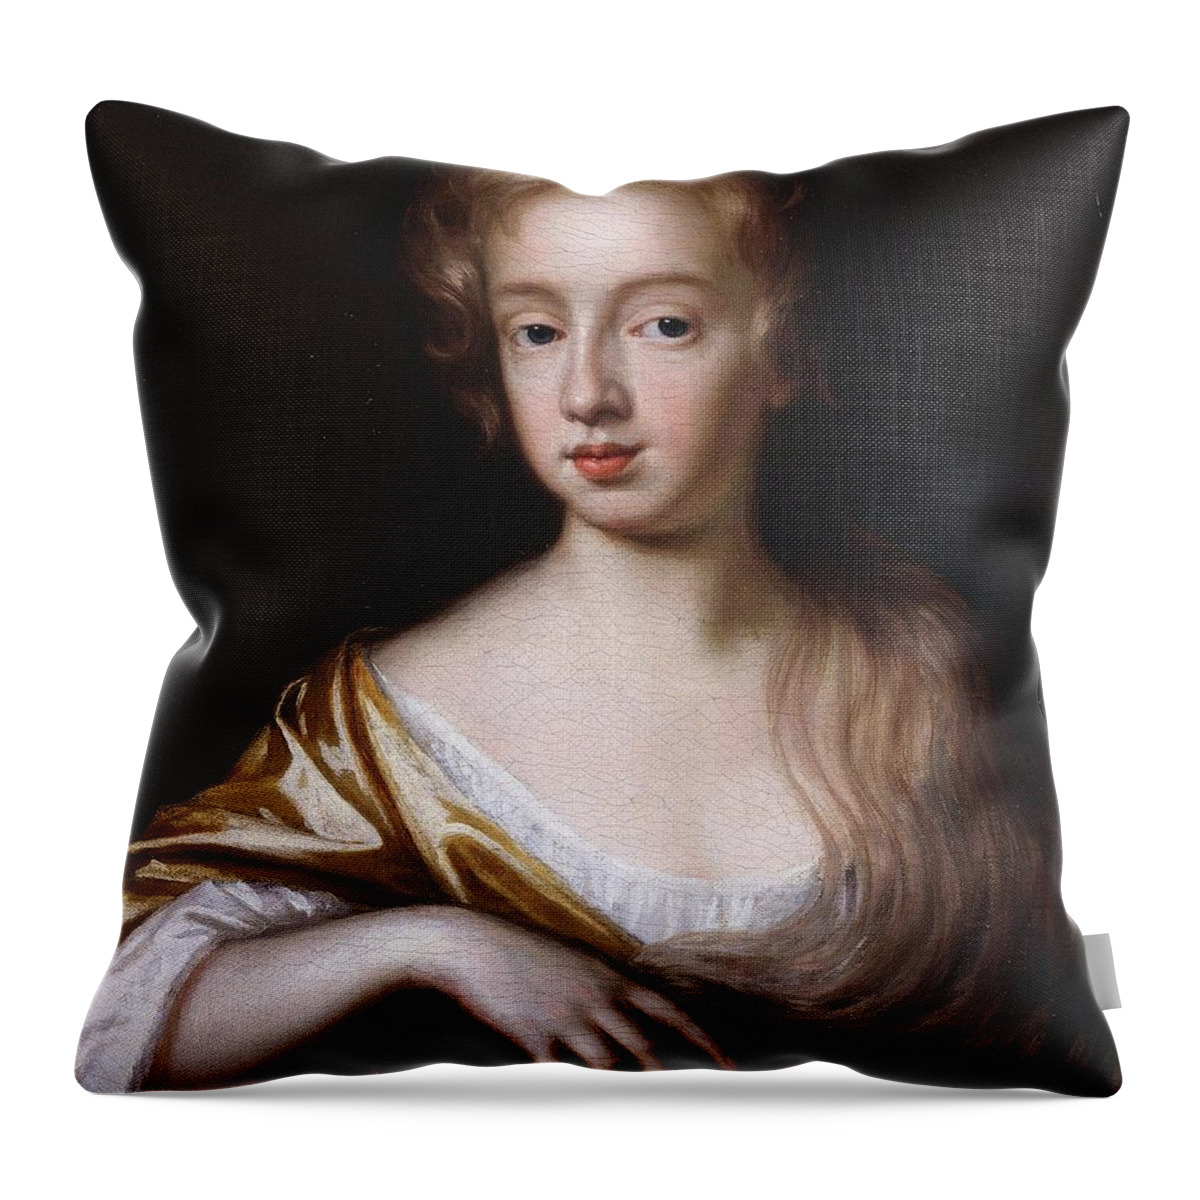 Mary Beale (1632 - 1699) Throw Pillow featuring the painting An Unknown Young Lady by Mary Beale